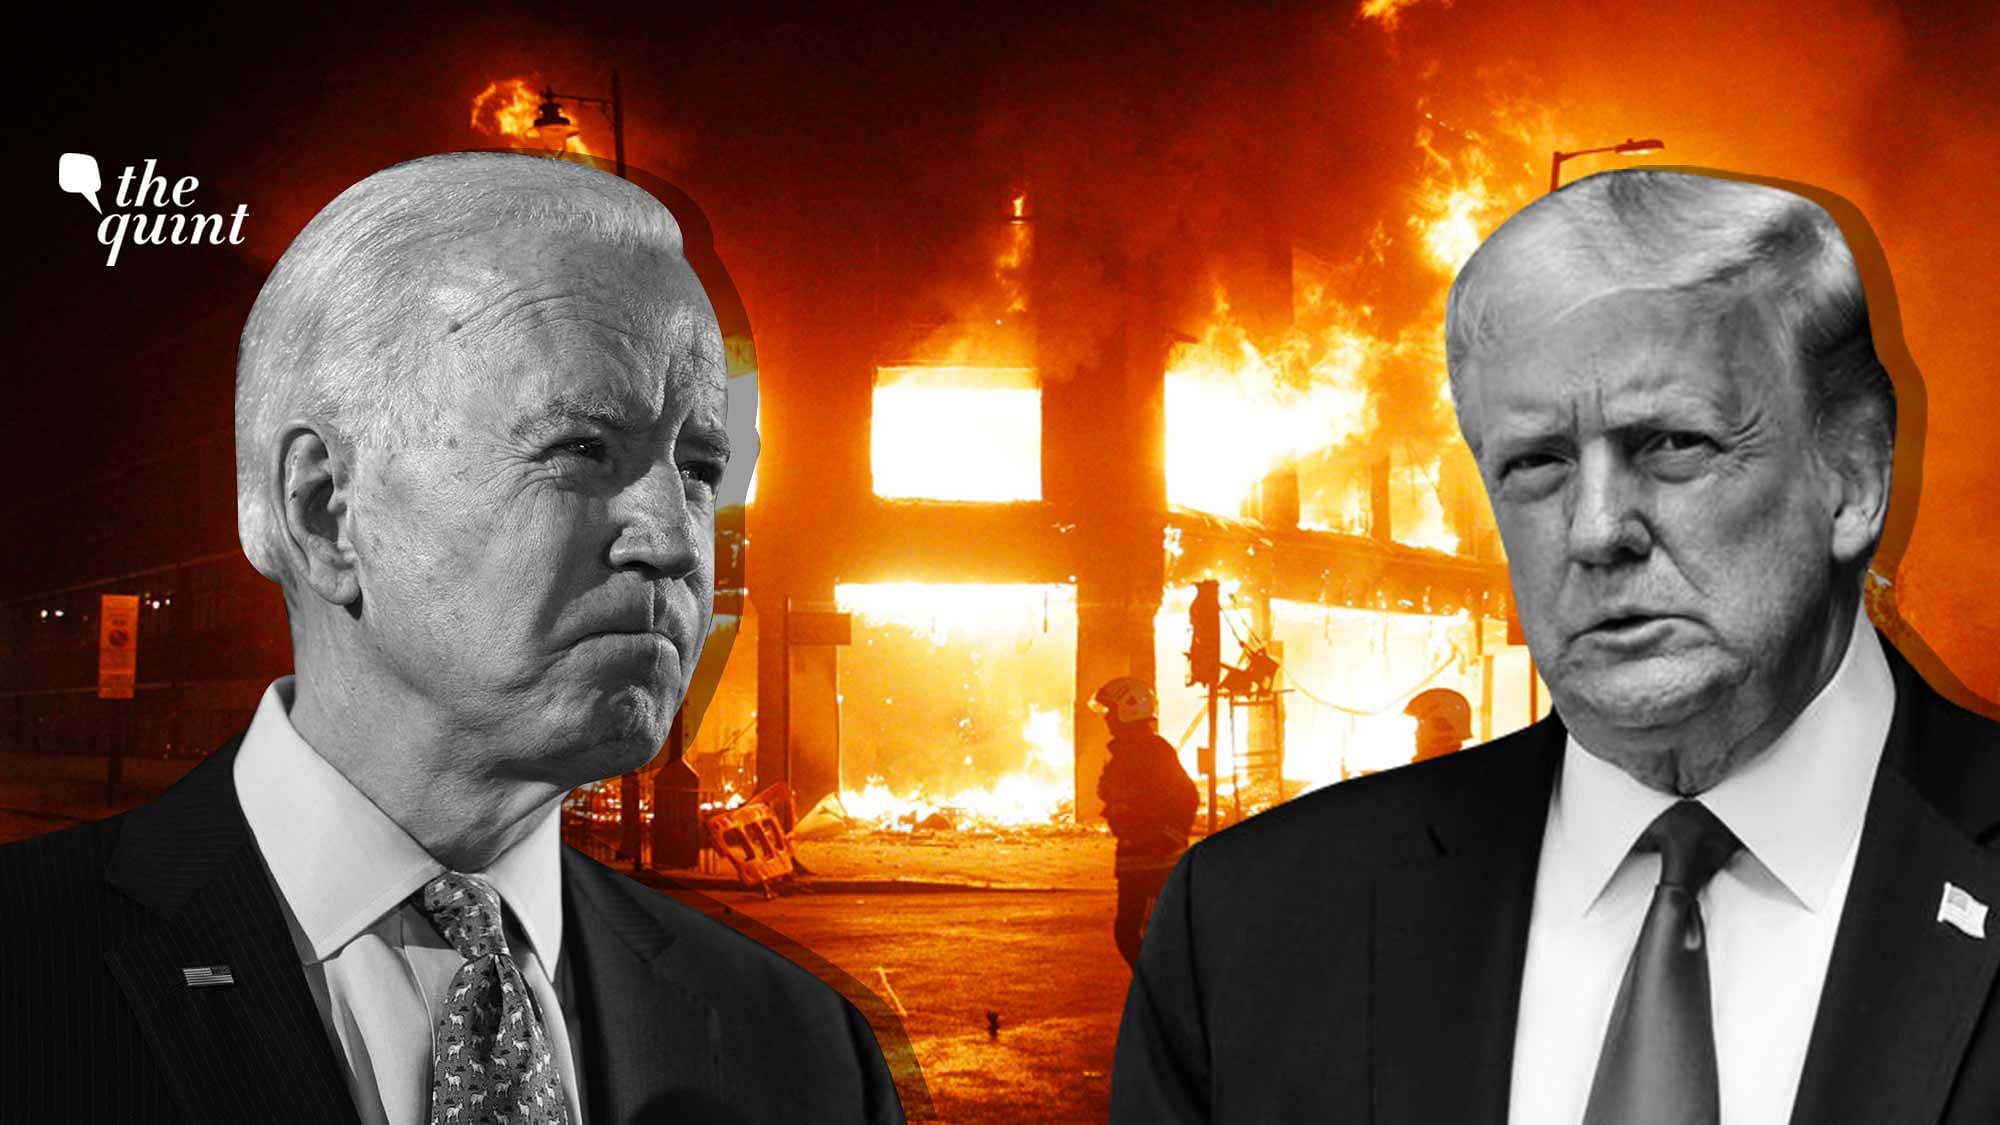 Image of Joe Biden (L) and Trump (R), with a picture representing anarchy /violence as the backdrop – to symbolise the essence of the article.